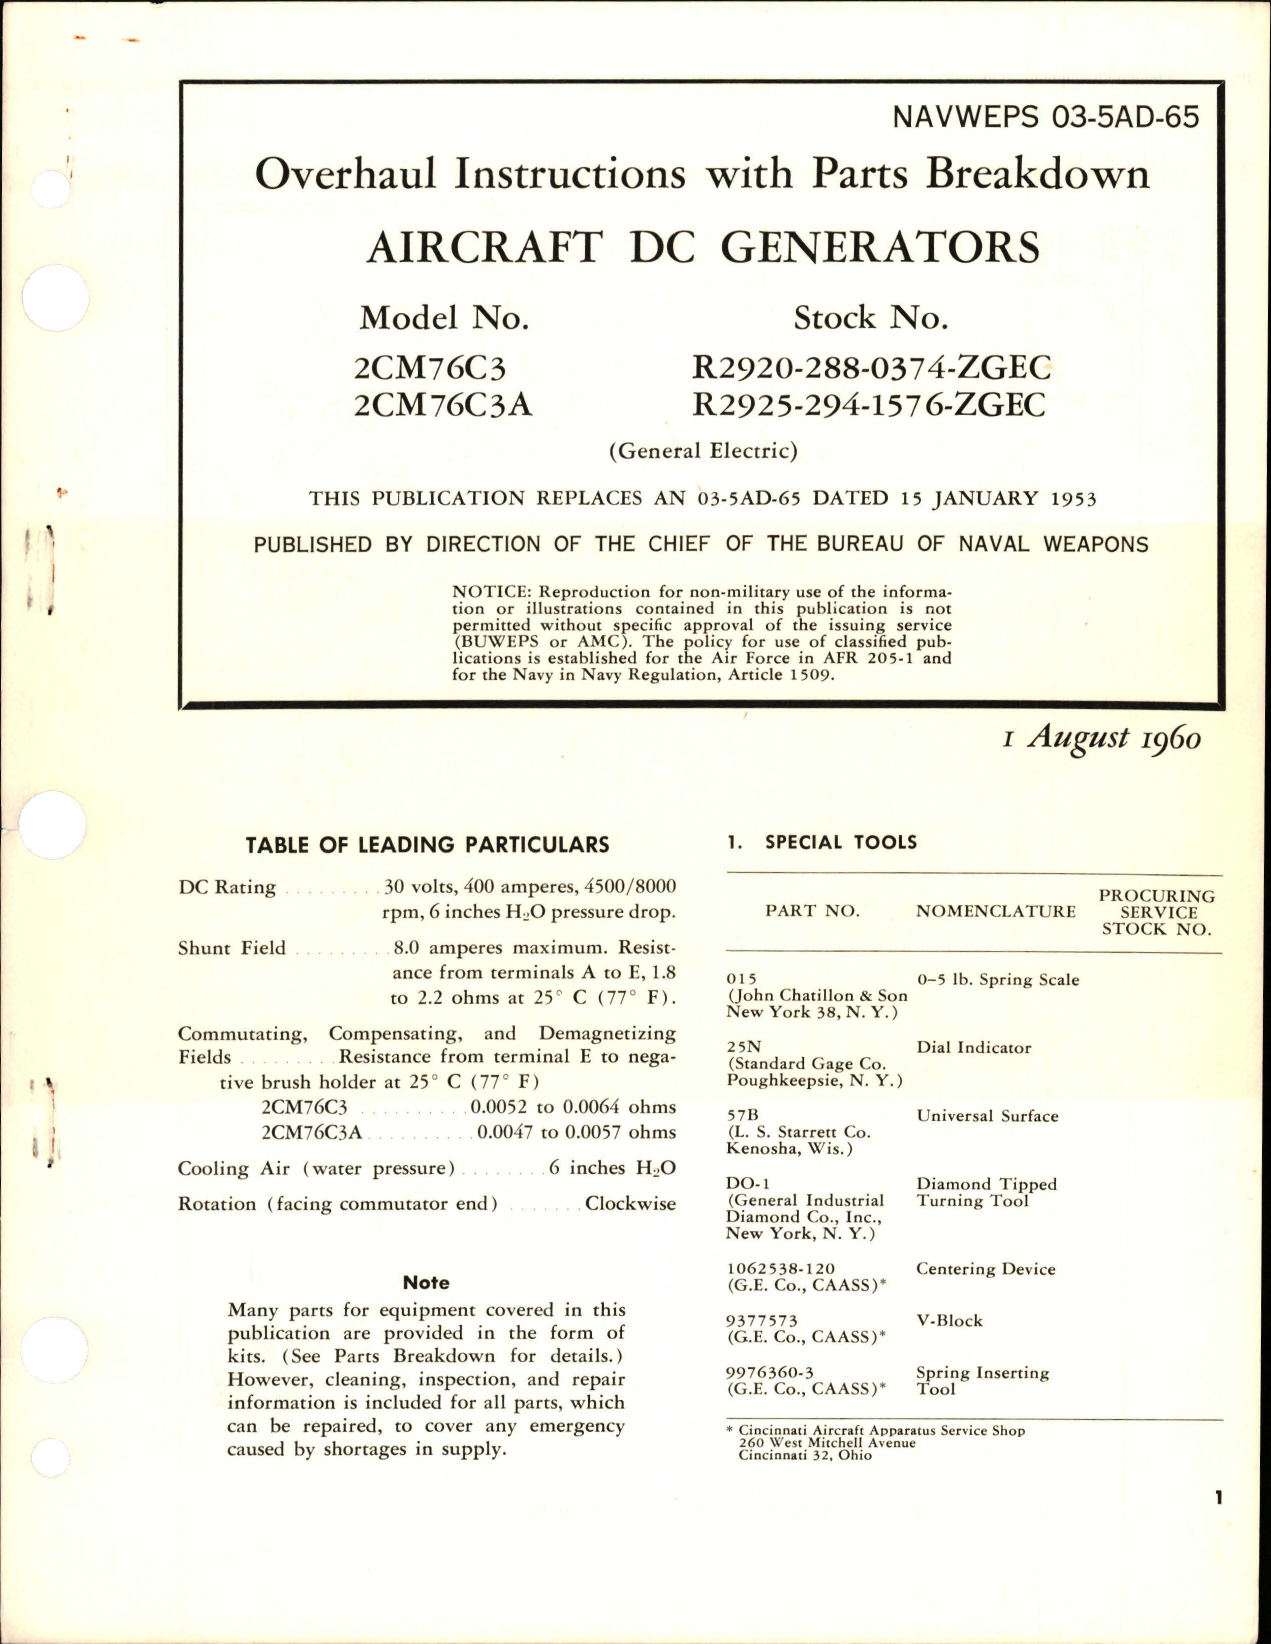 Sample page 1 from AirCorps Library document: Overhaul Instructions with Parts Breakdown for D-C Generators - Models 2CM76C3, and 2CM76C3A